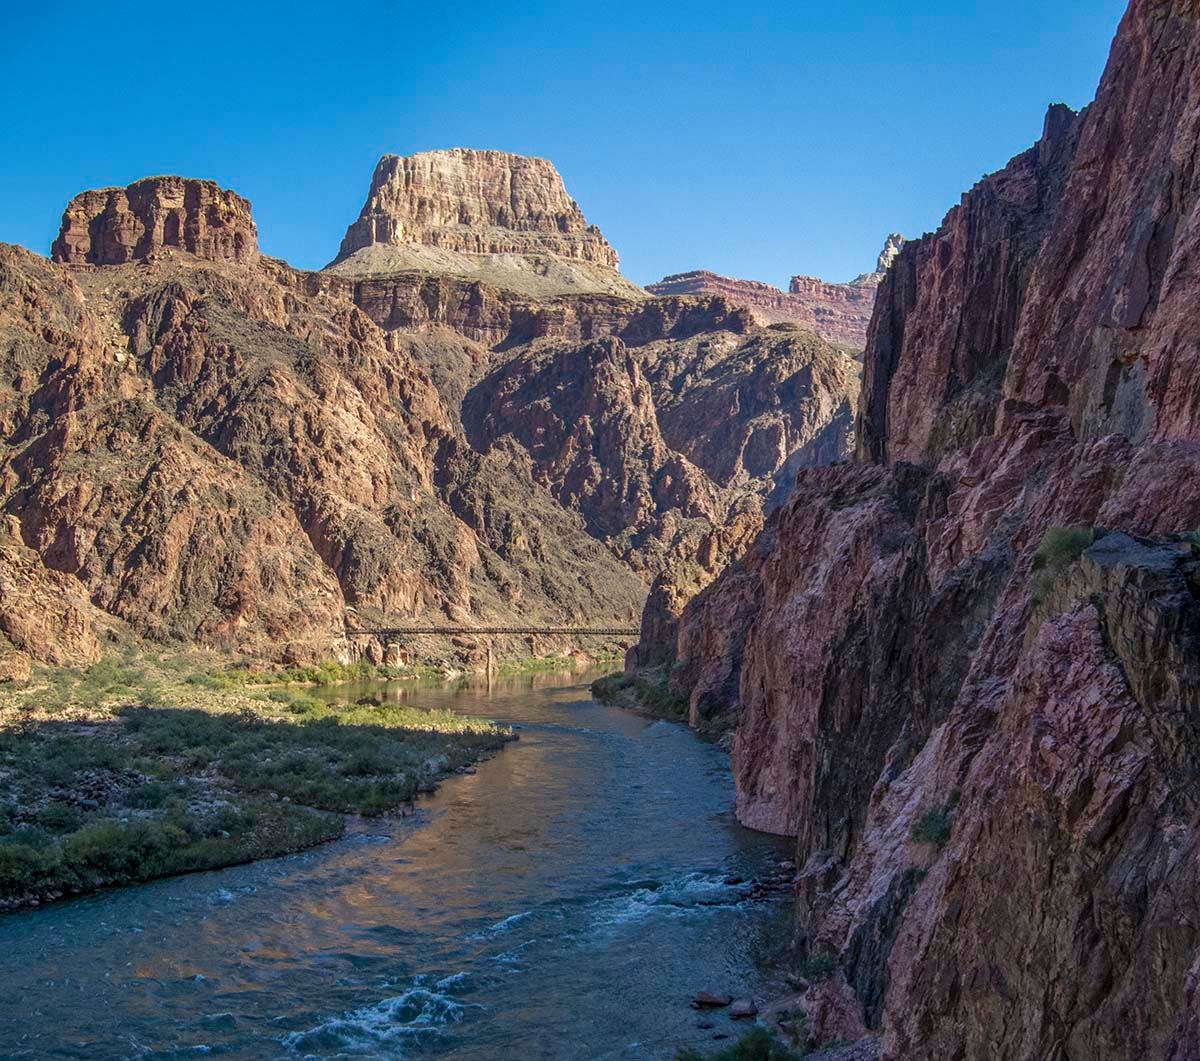 A sheer cliff marks the River Trail above the Colorado River